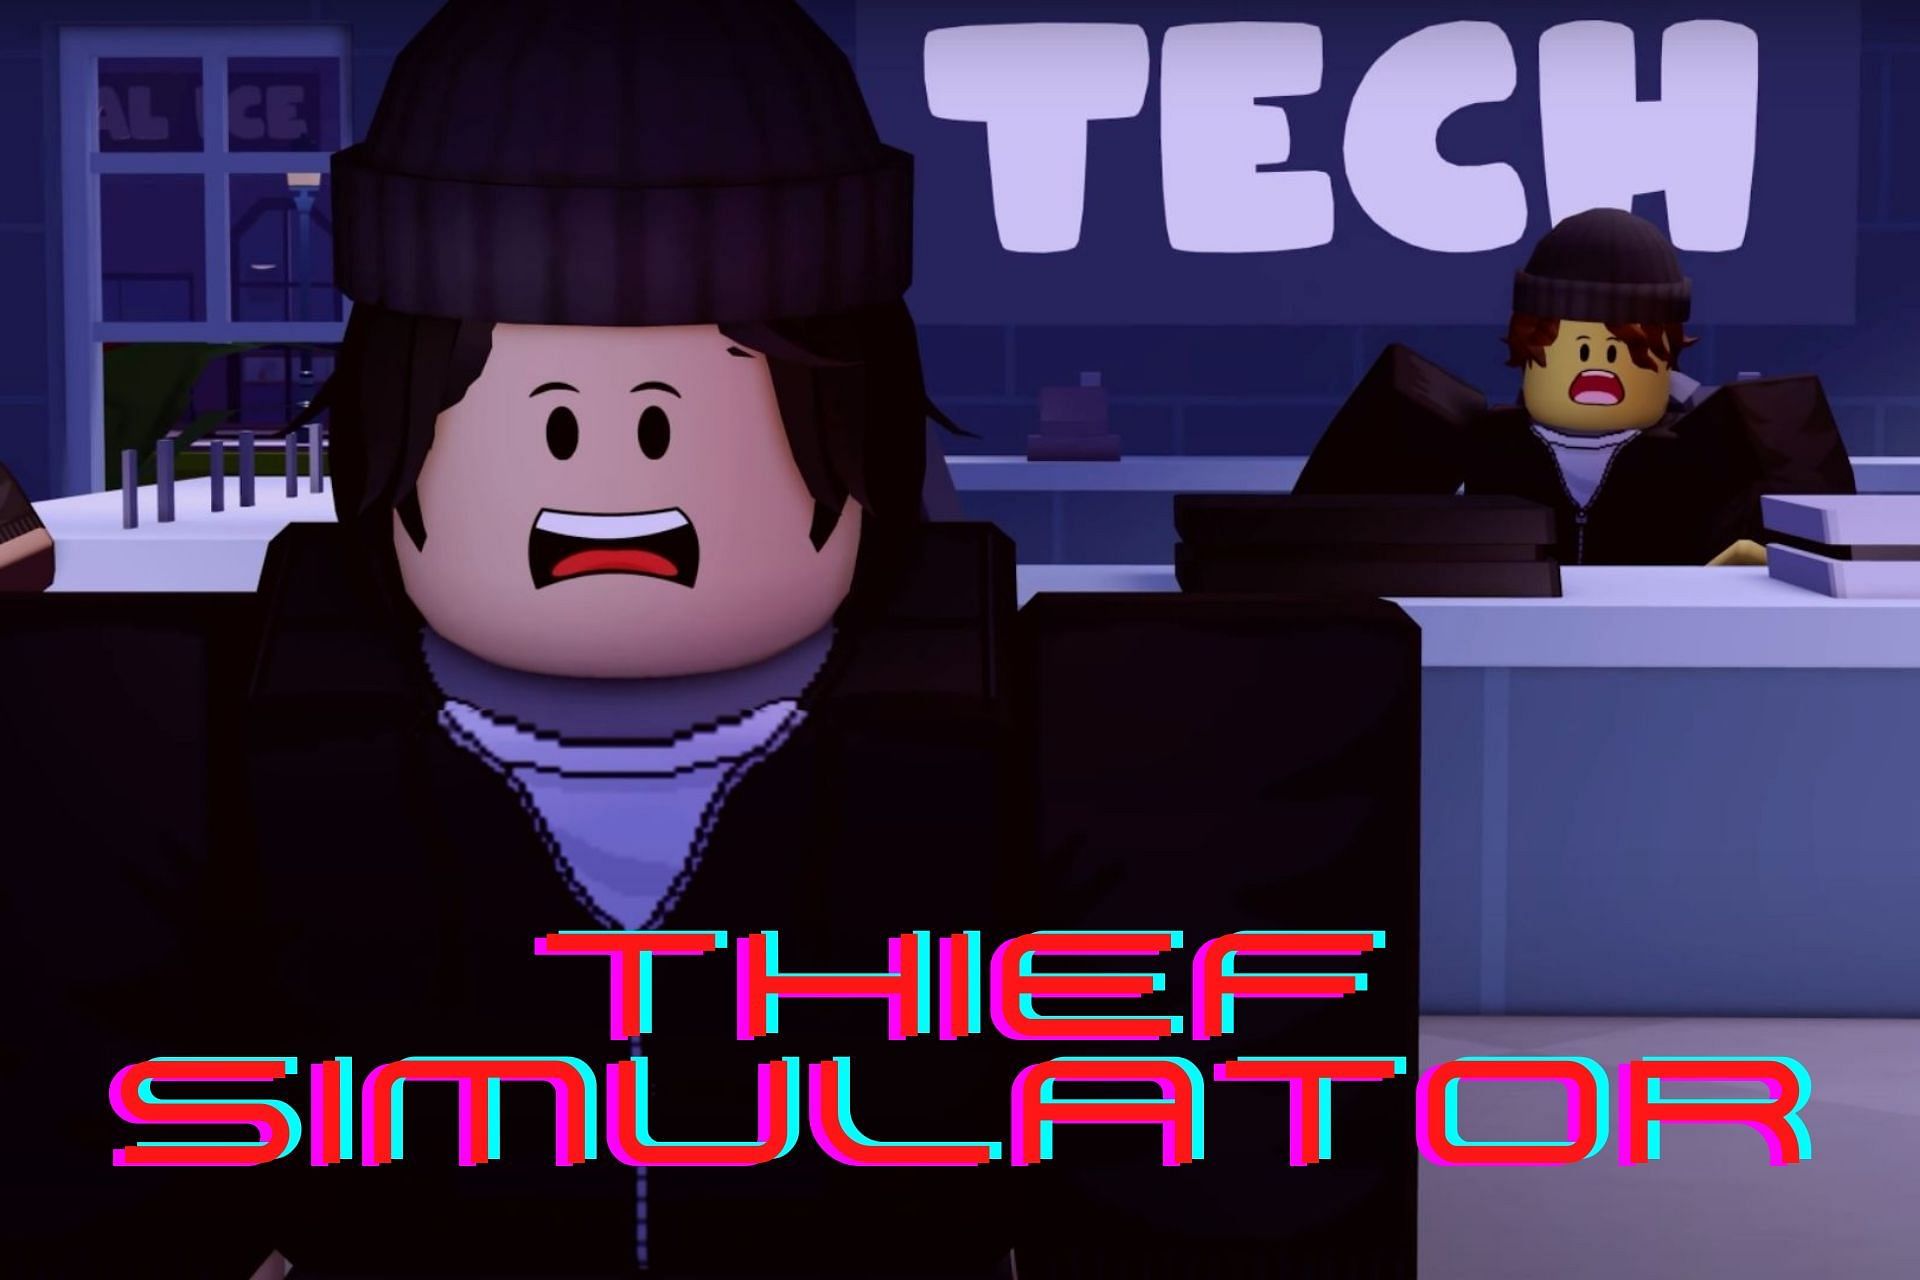 thief-simulator-codes-in-roblox-free-gems-and-cash-october-2022